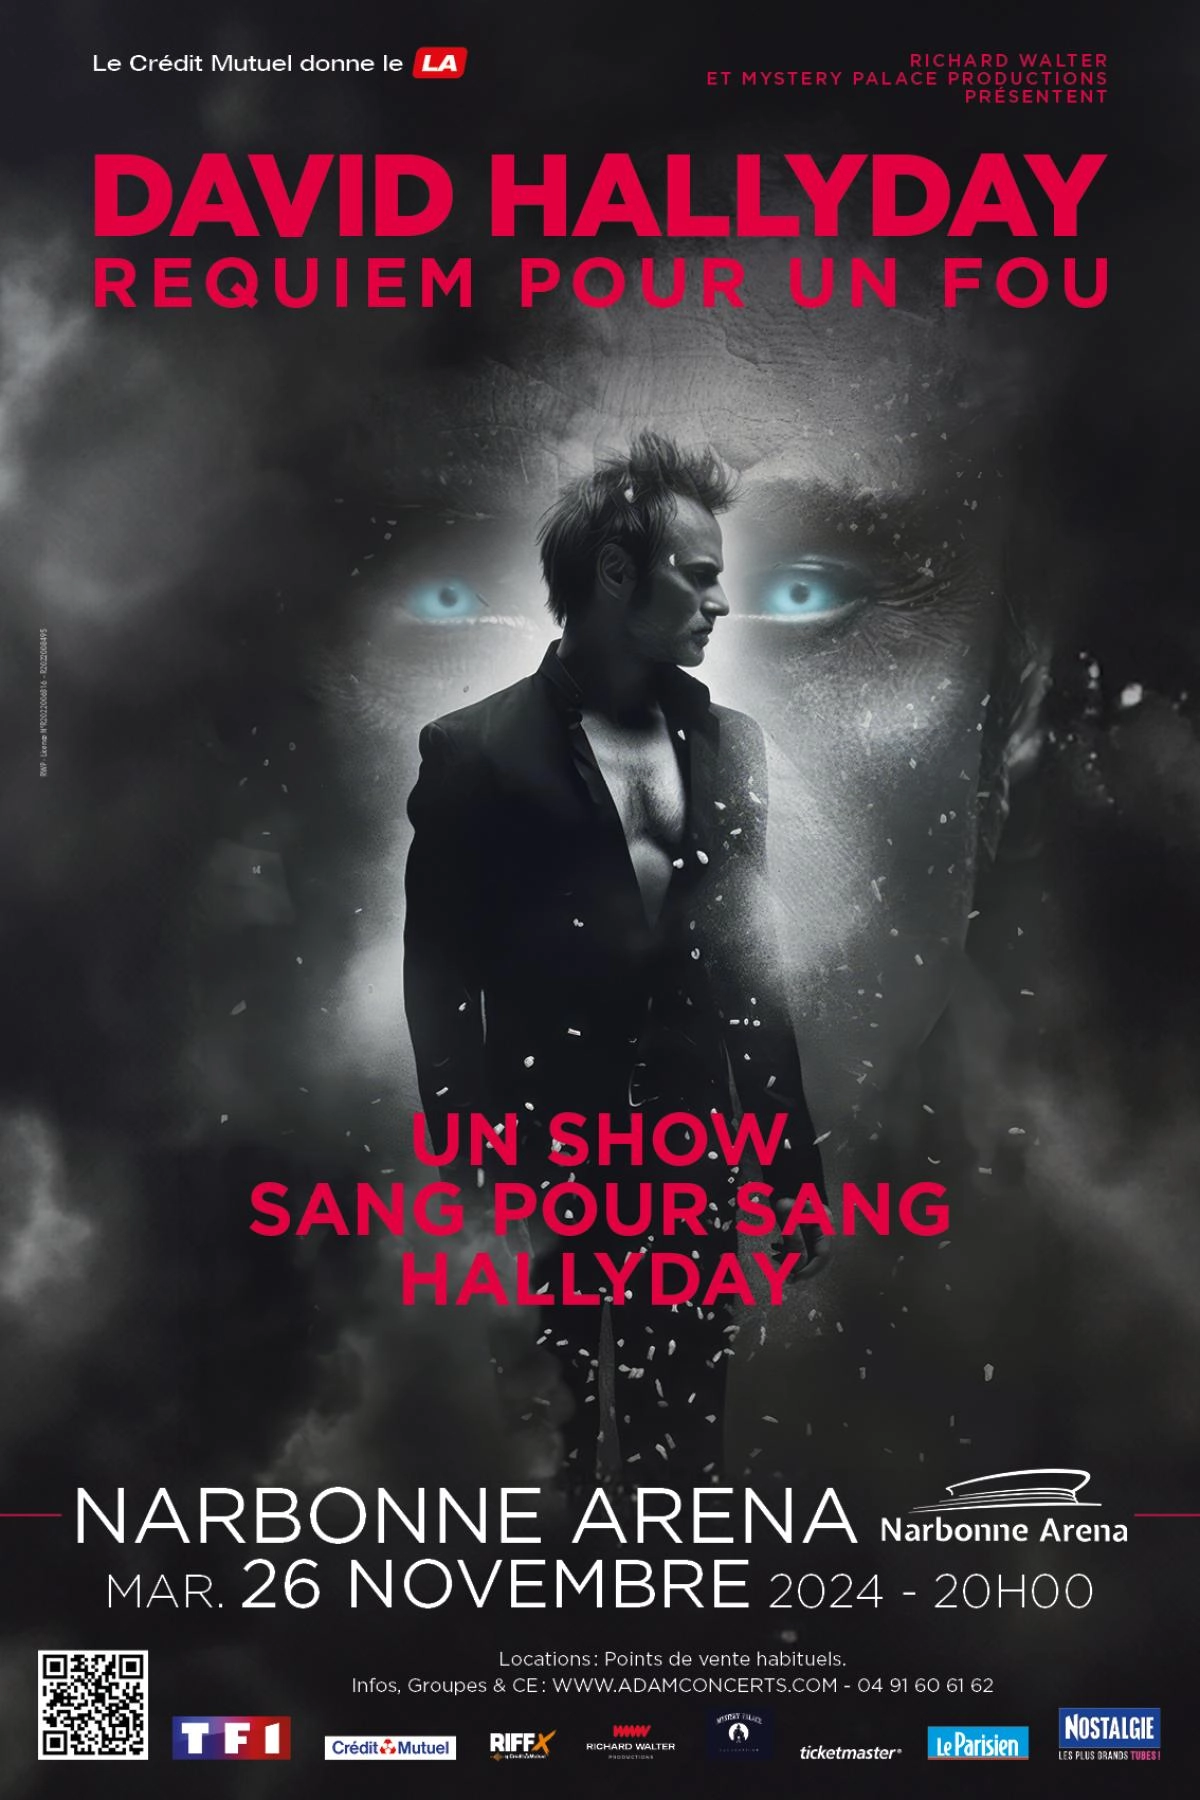 David Hallyday at Narbonne Arena Tickets